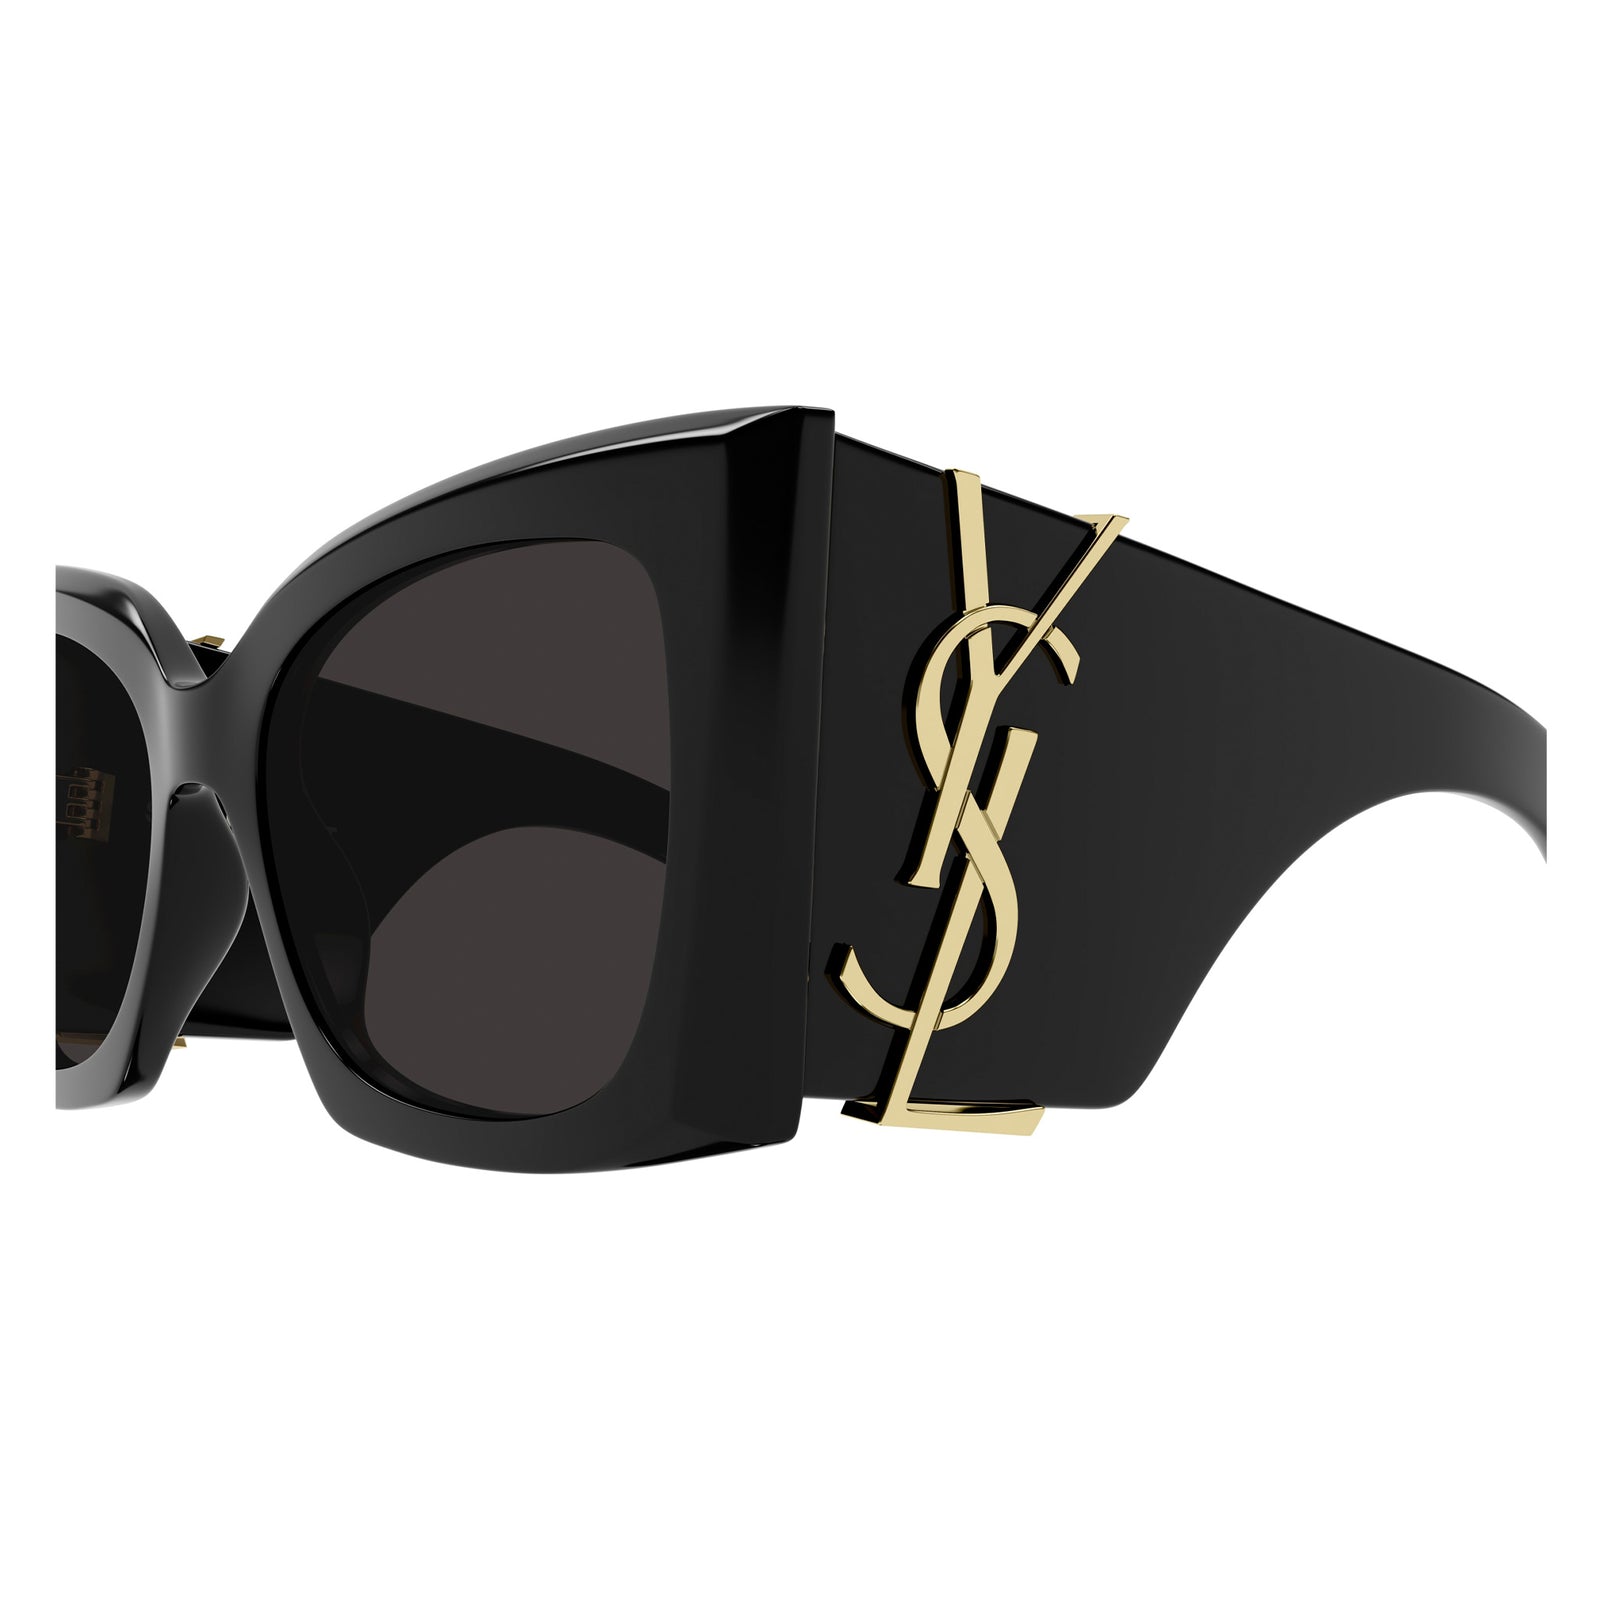 This pair of YSL sunglasses is selling like hotcakes after Heart